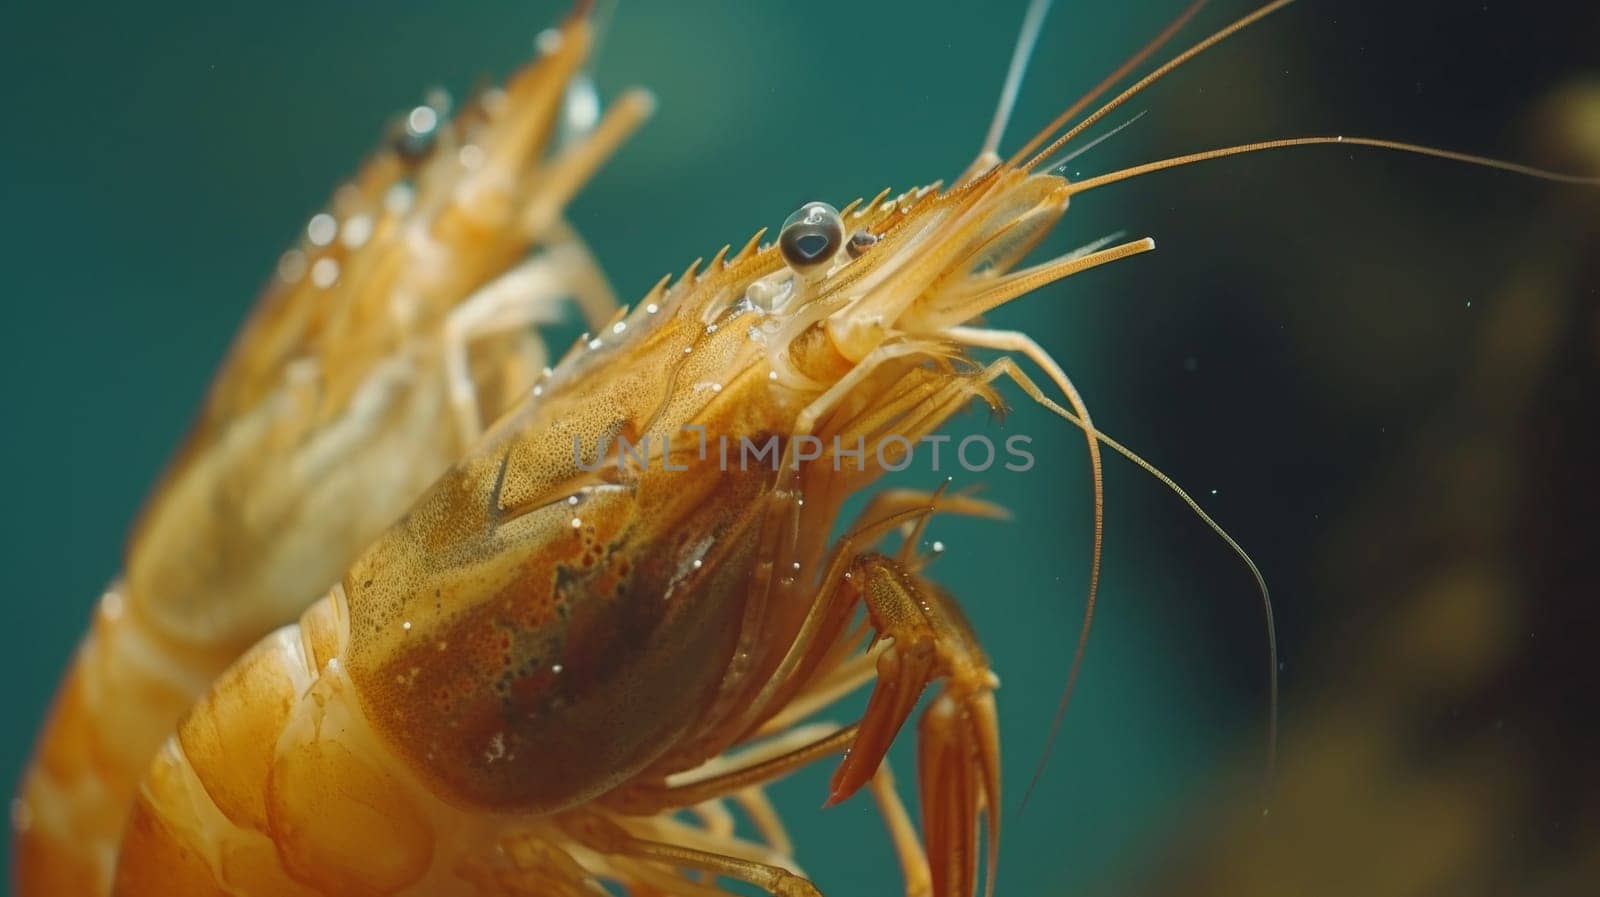 A close up of two shrimp with water droplets on their backs